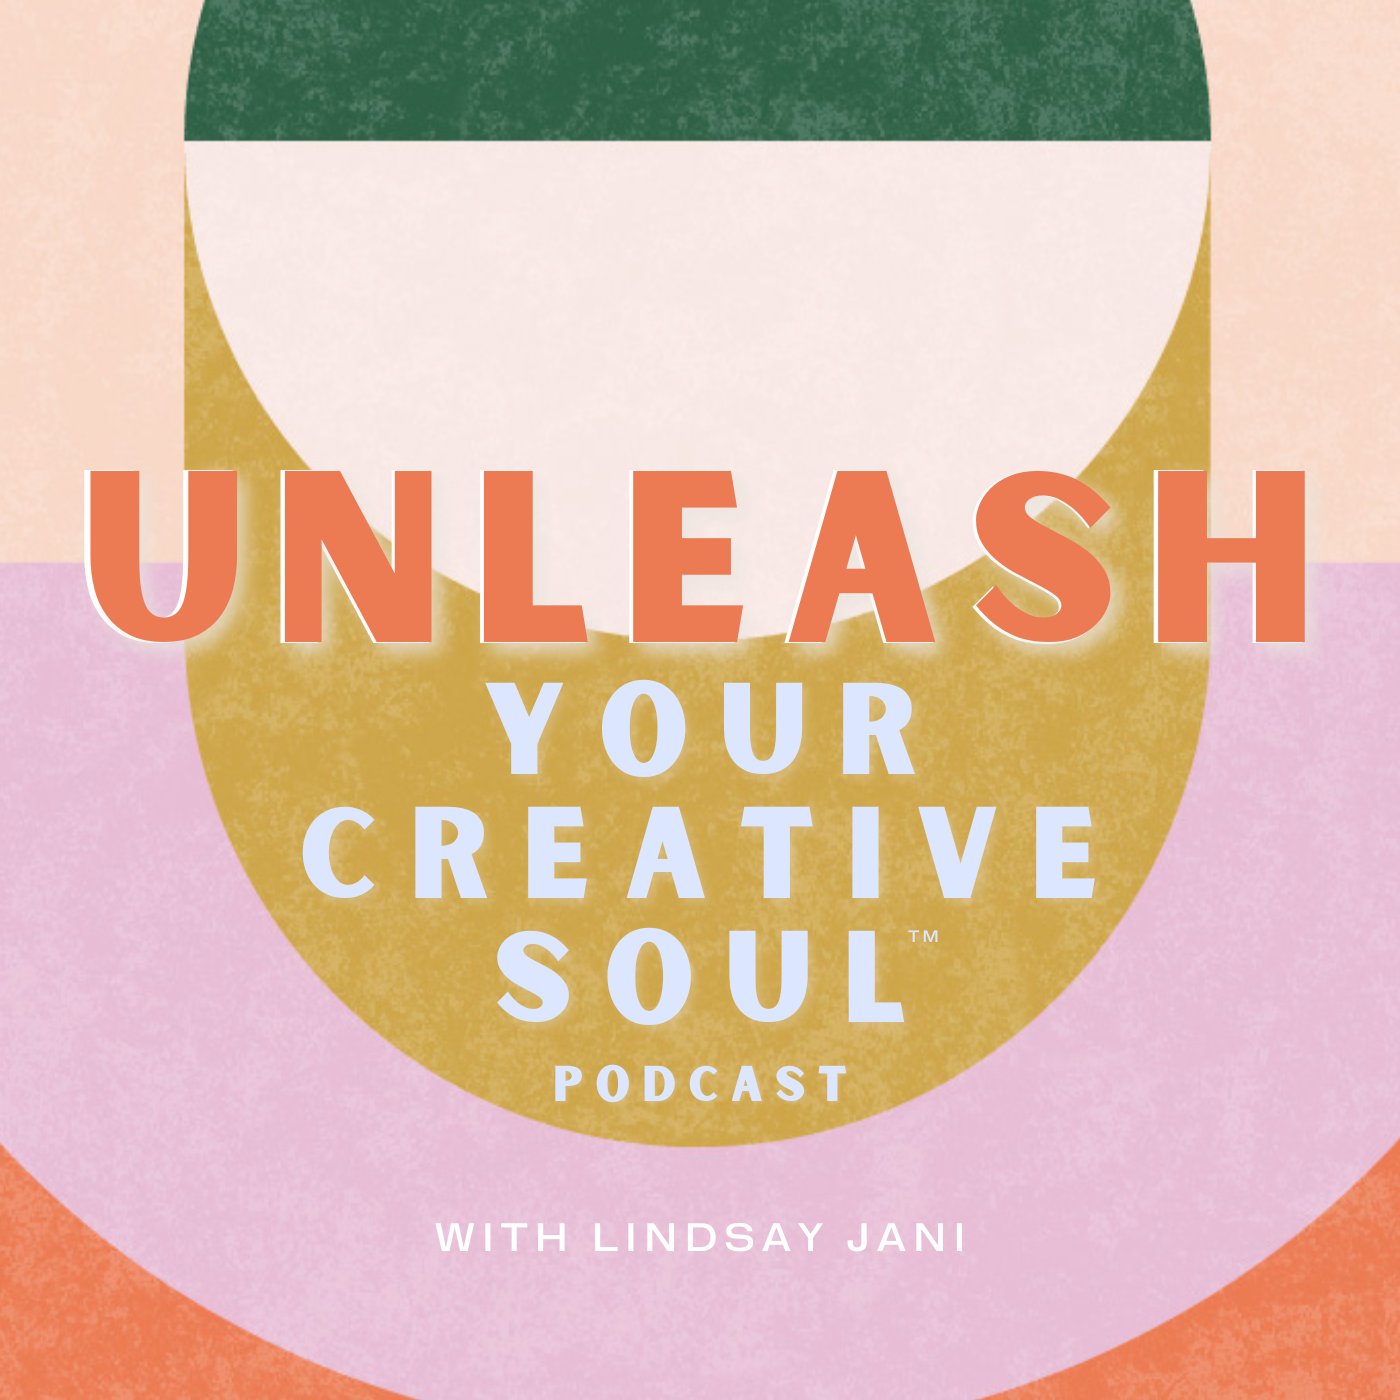 Unleash Your Creative Soul Podcast by Lindsay Jani